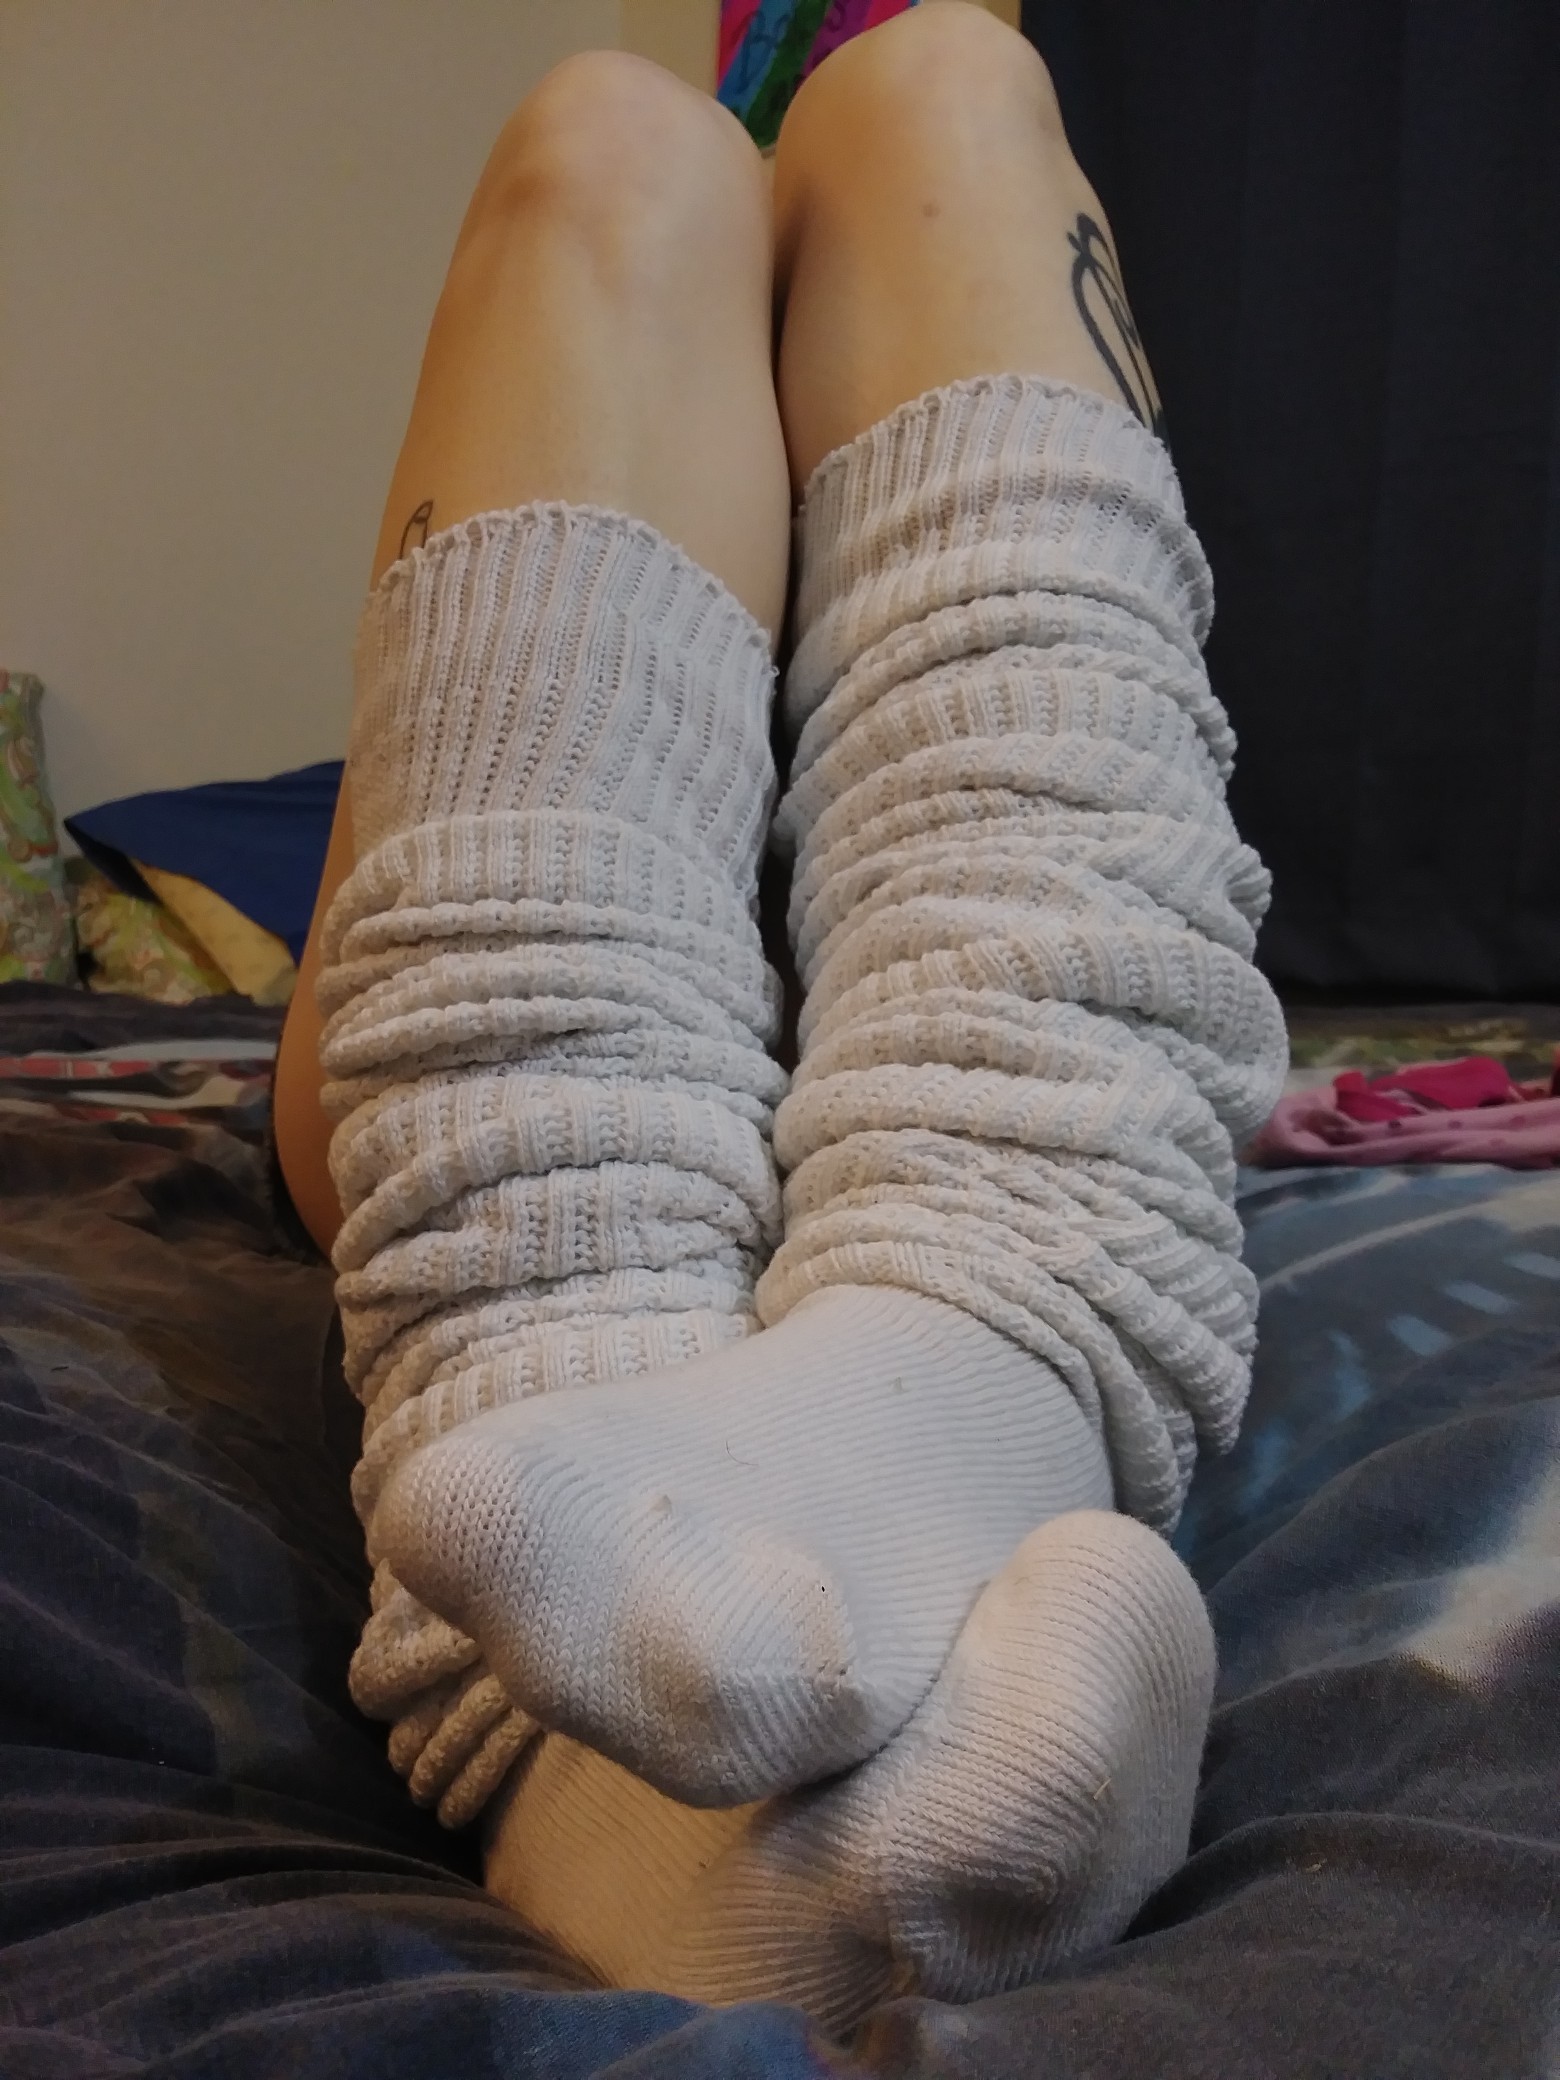 thesockqueen:You have been SOCKED beyond porn pictures